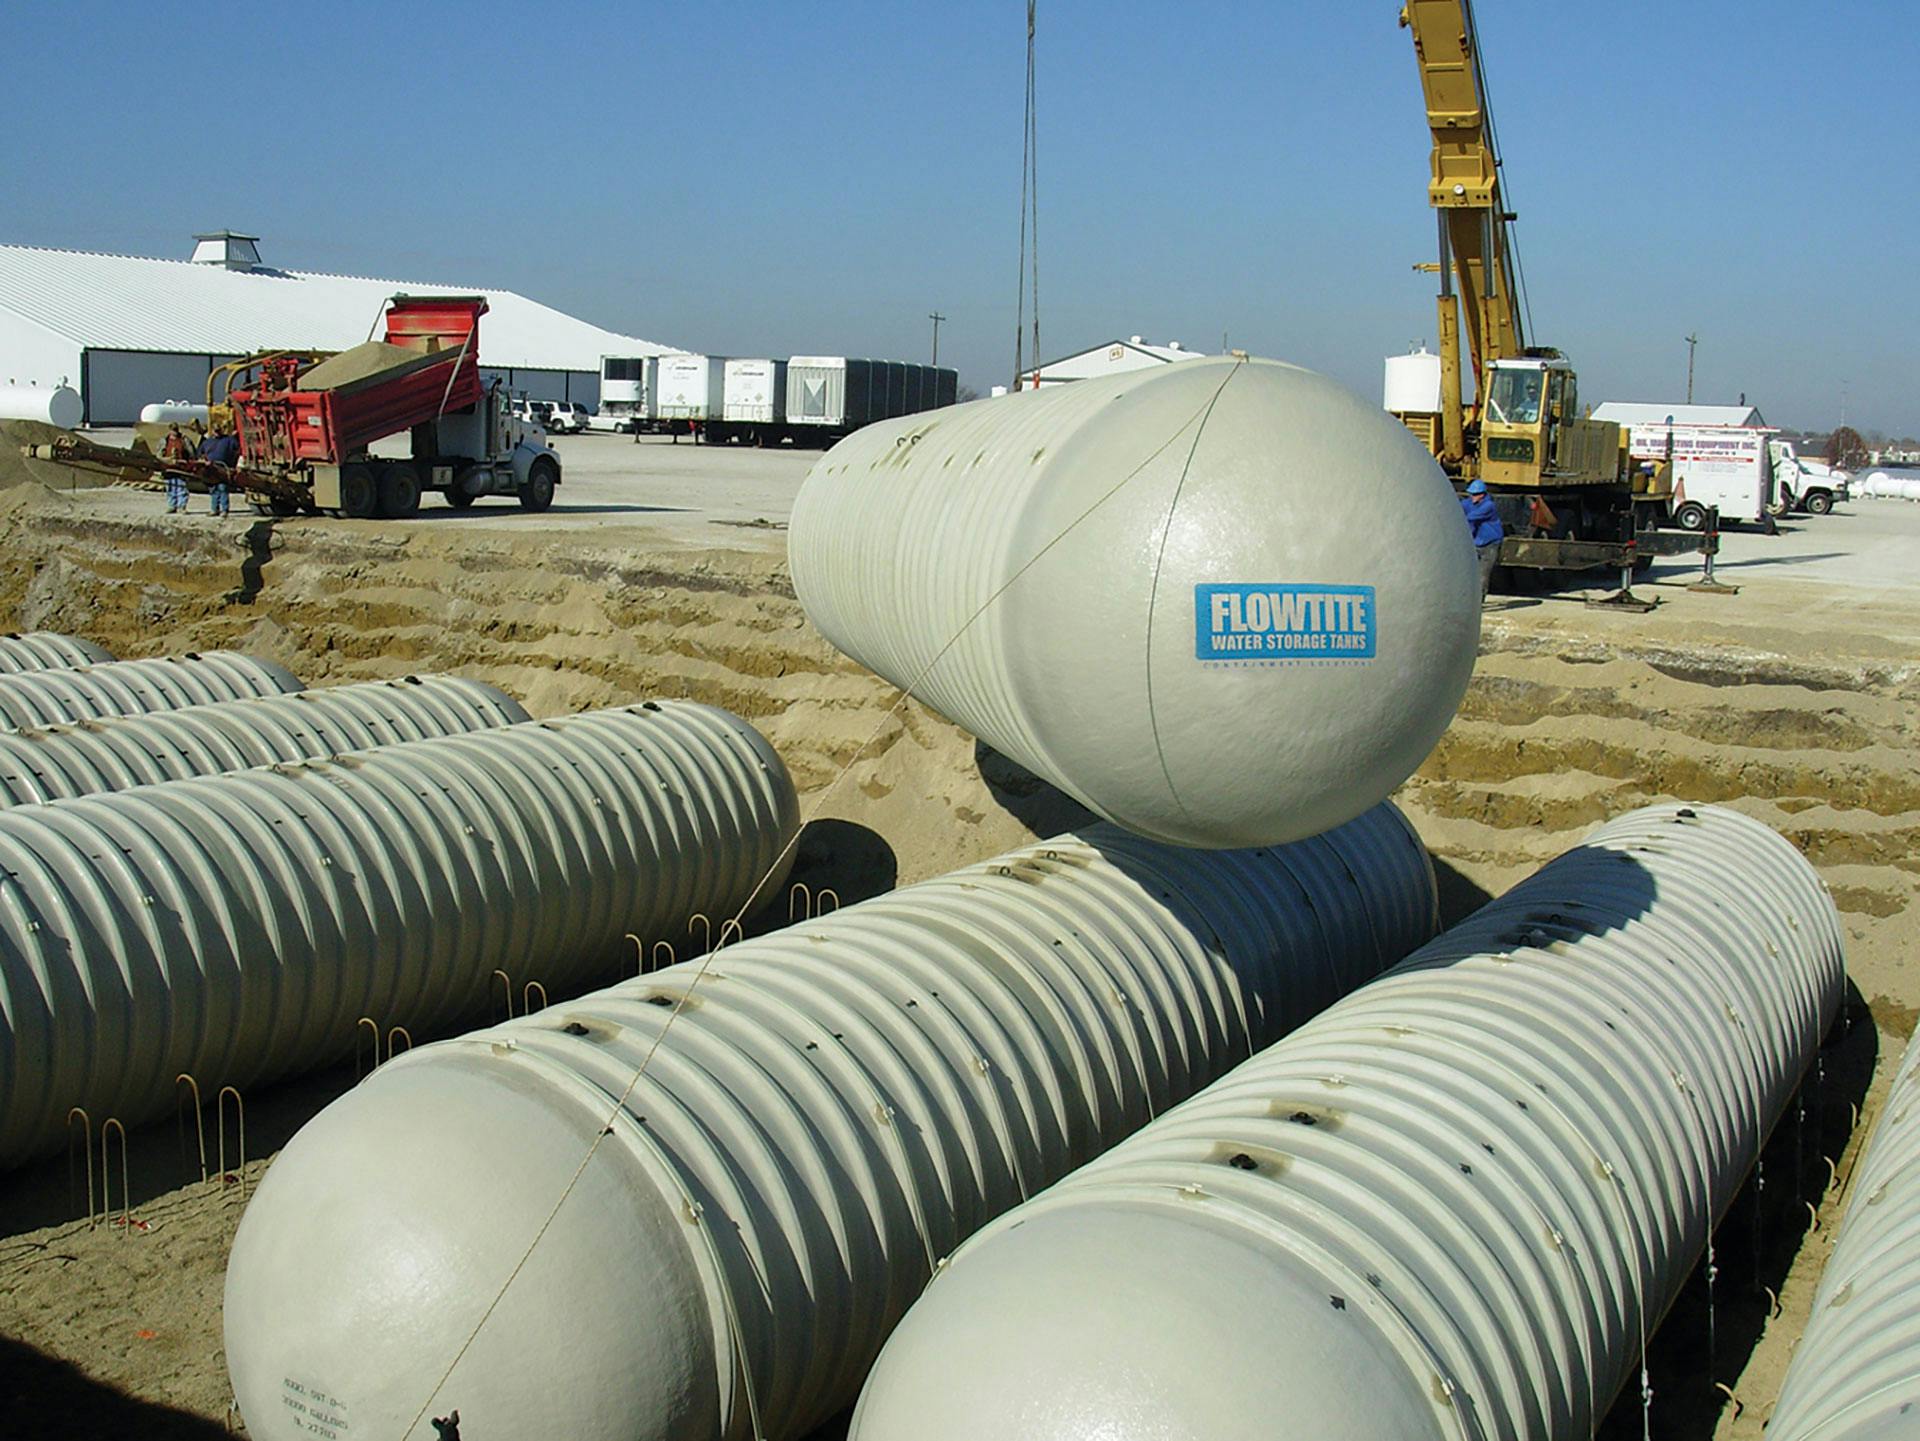 Flowtite stormwater tanks being installed underground with use of a crane